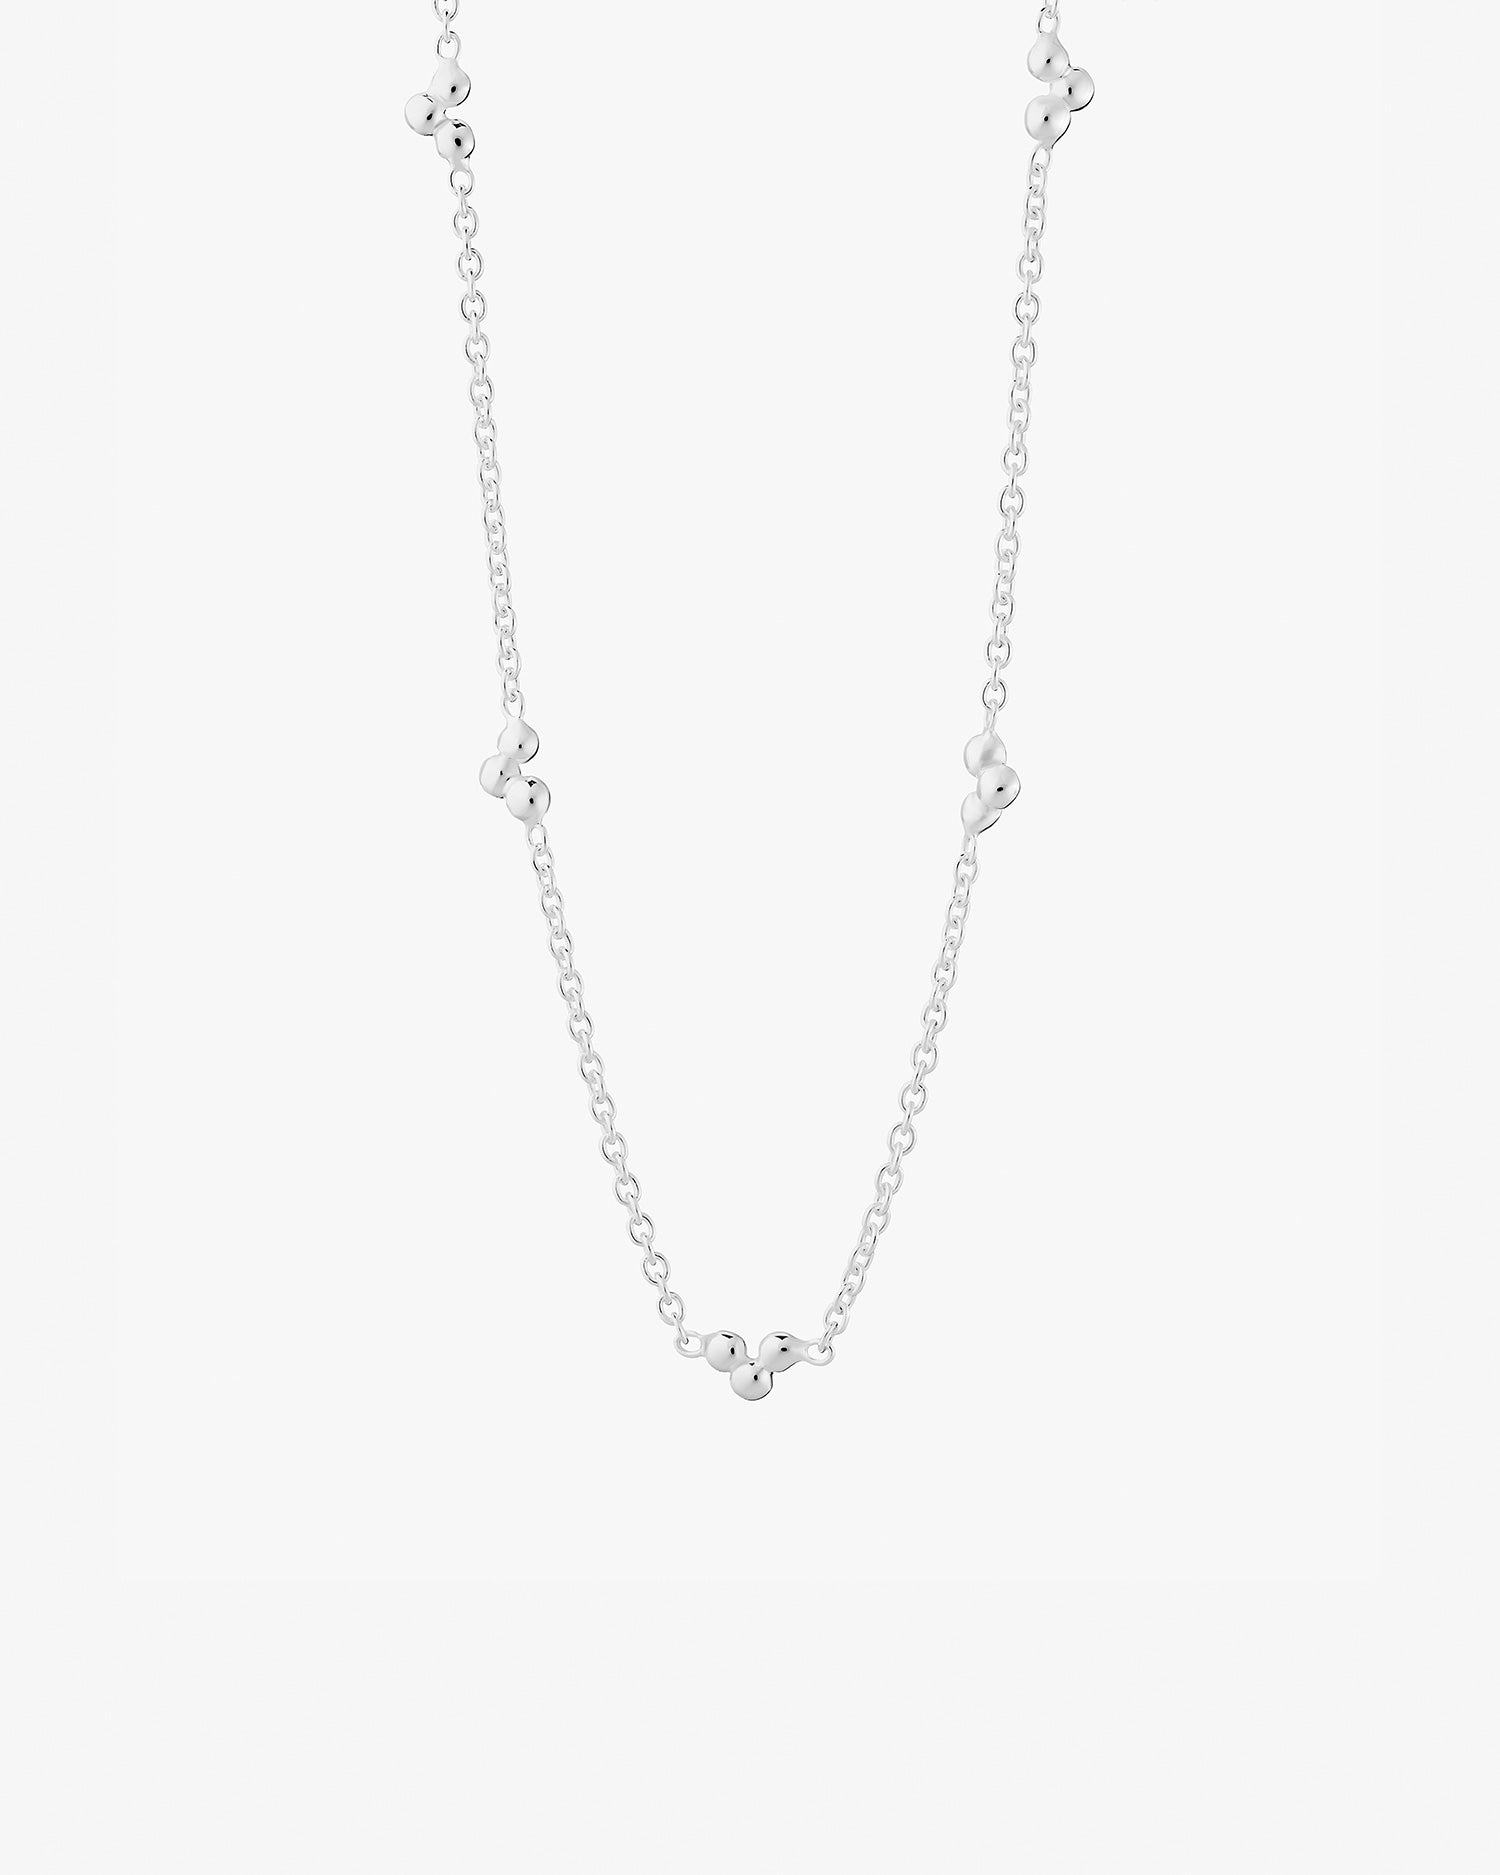 Drops-full-necklace-02